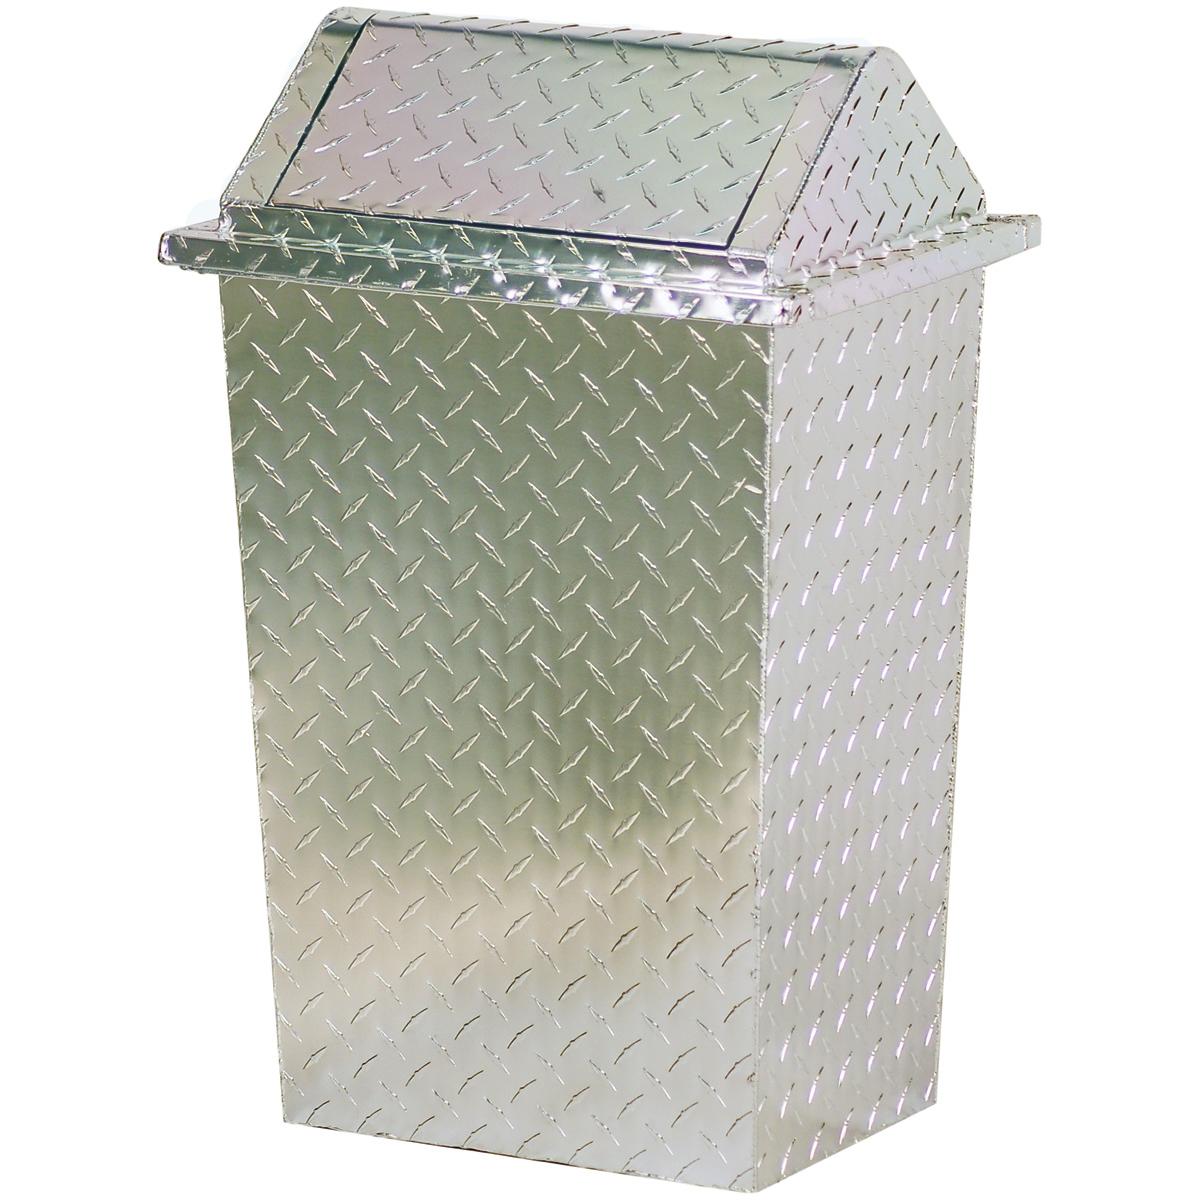 DISCONTINUED] Diamond Plate Swivel Top Trash Can - FREE SHIPPING